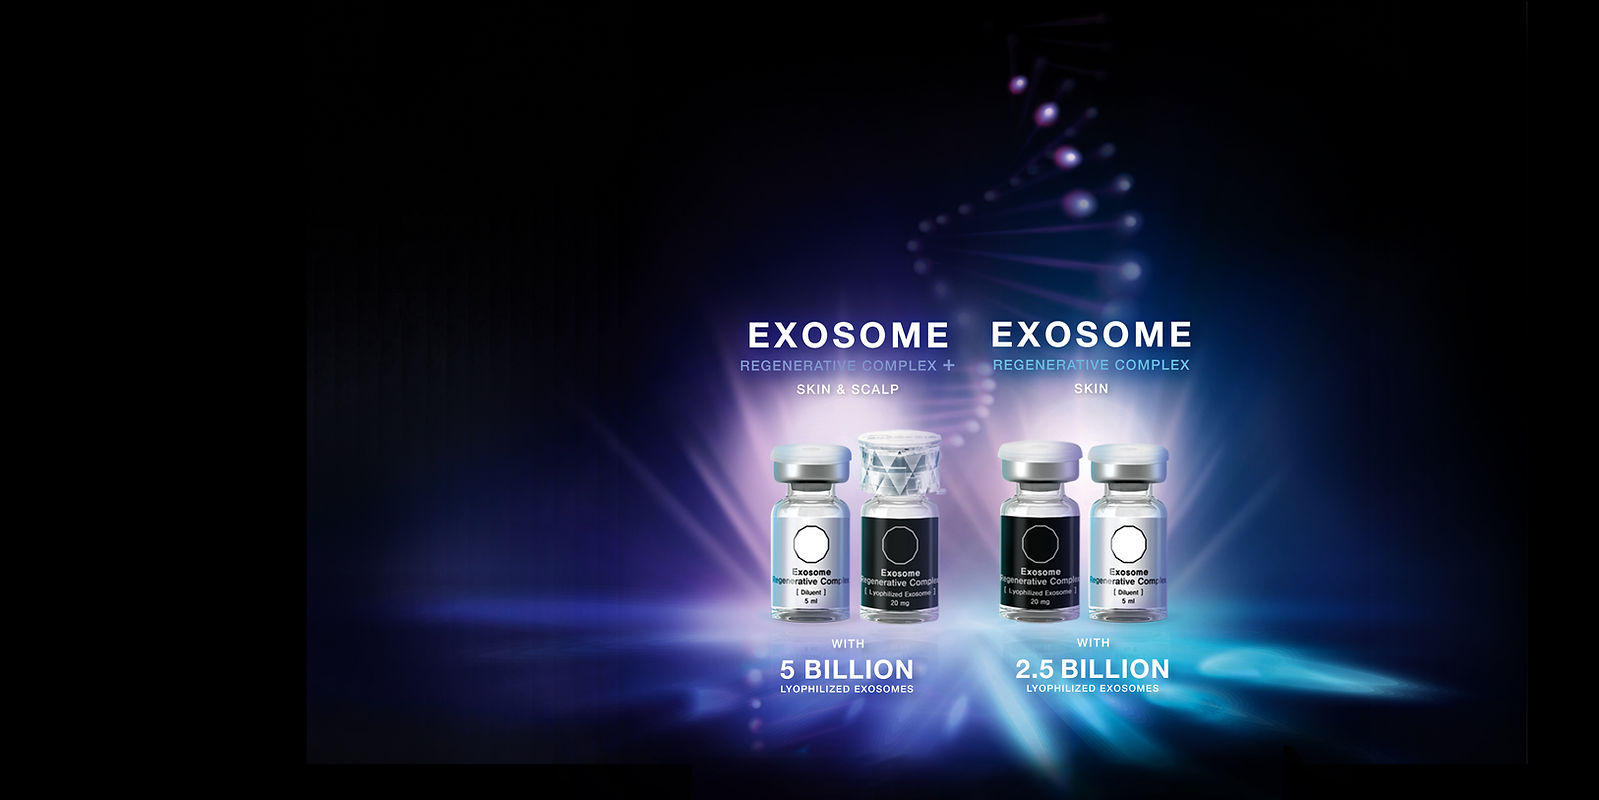 A poster of exosome and its products.